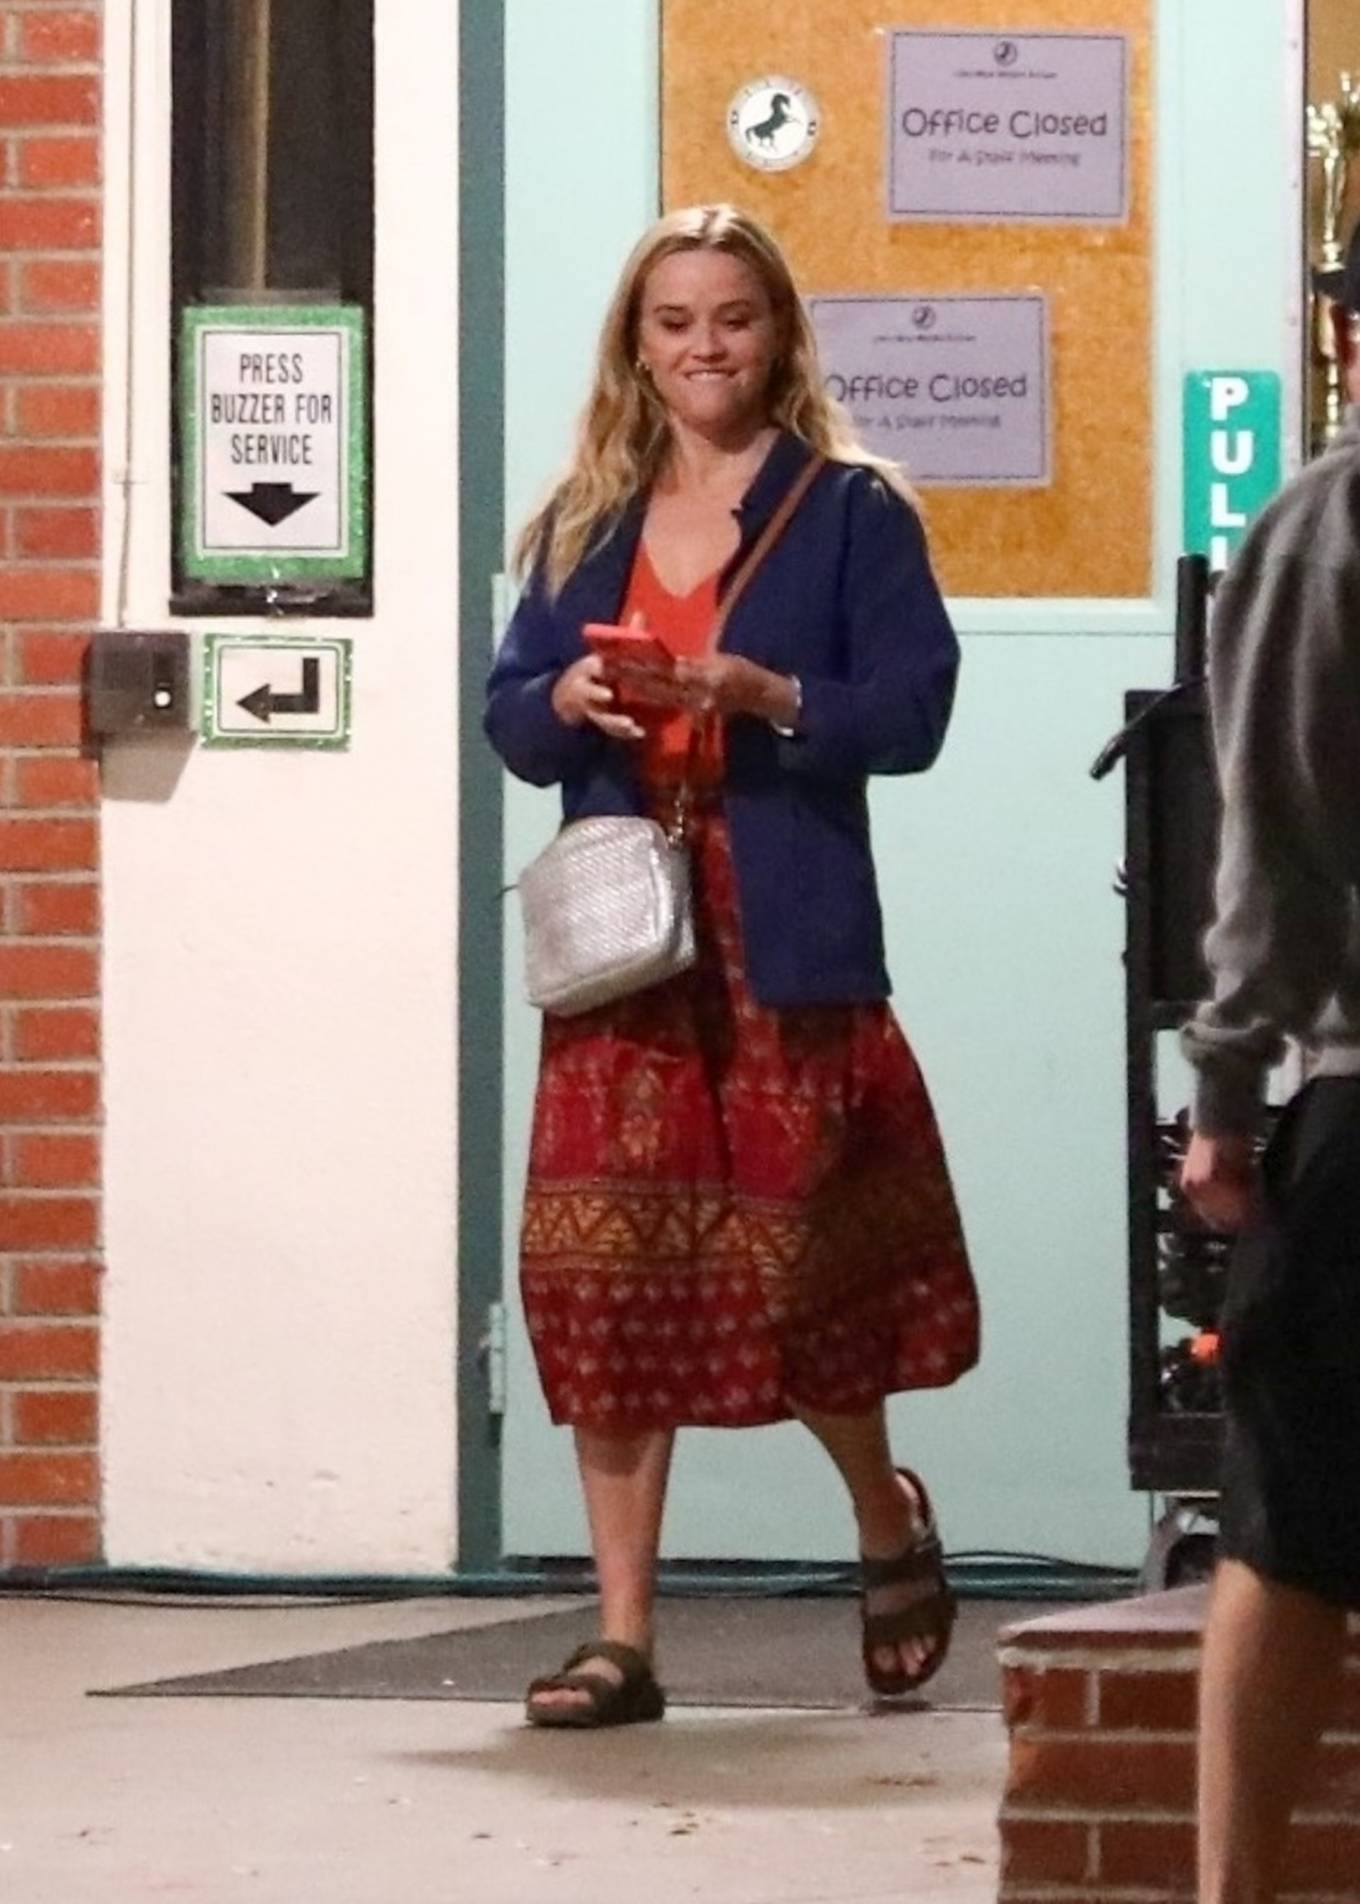 Reese Witherspoon - Finishes filming 'Your Place or Mine' before Thanksgiving weekend in Burbank